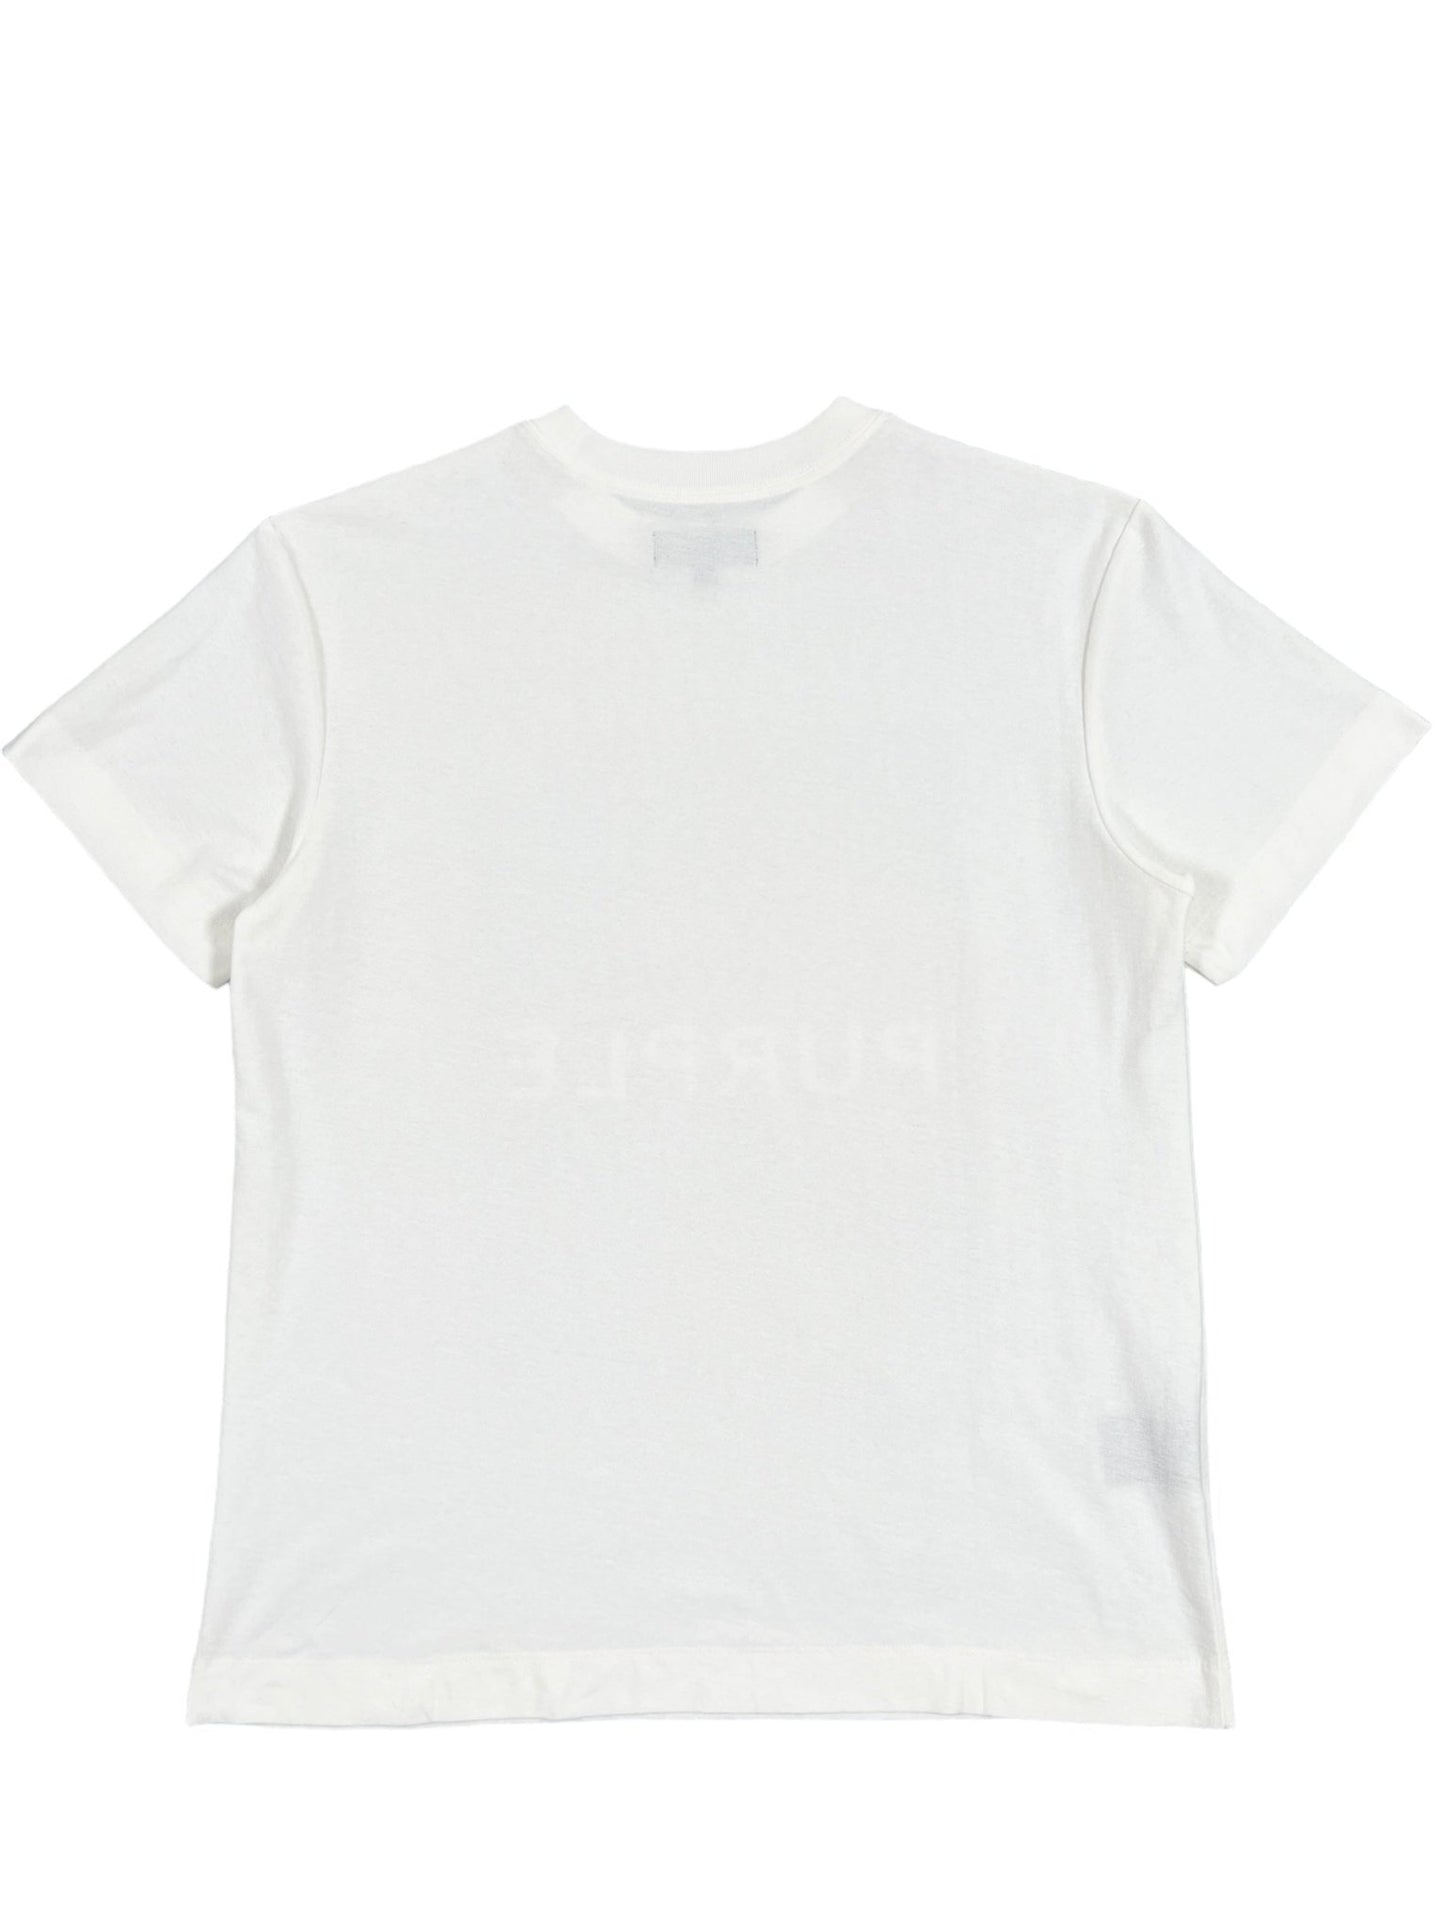 A Purple Brand P104-QRCC823 Textured Jersey SS Tee in Off White.